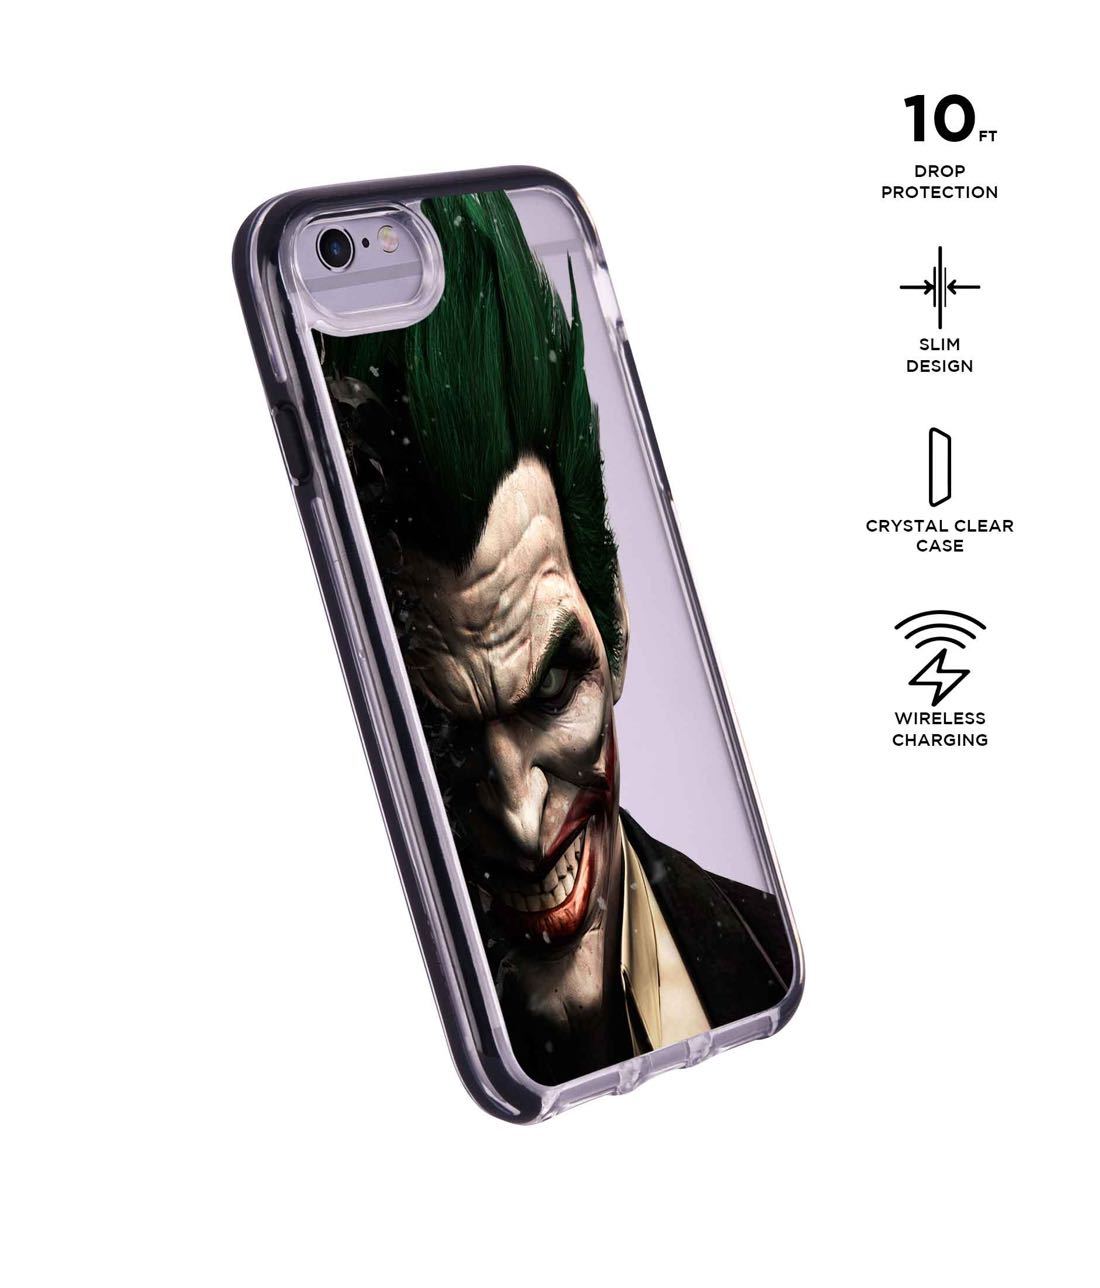 Joker Withers - Extreme Phone Case for iPhone 6 Plus